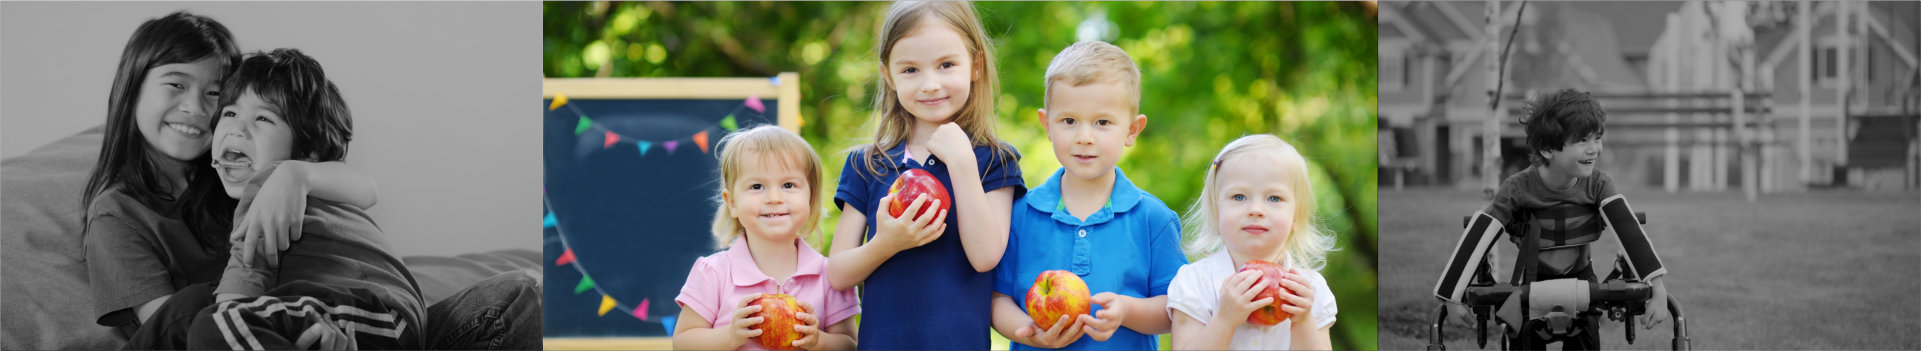 four cute kids holding apples